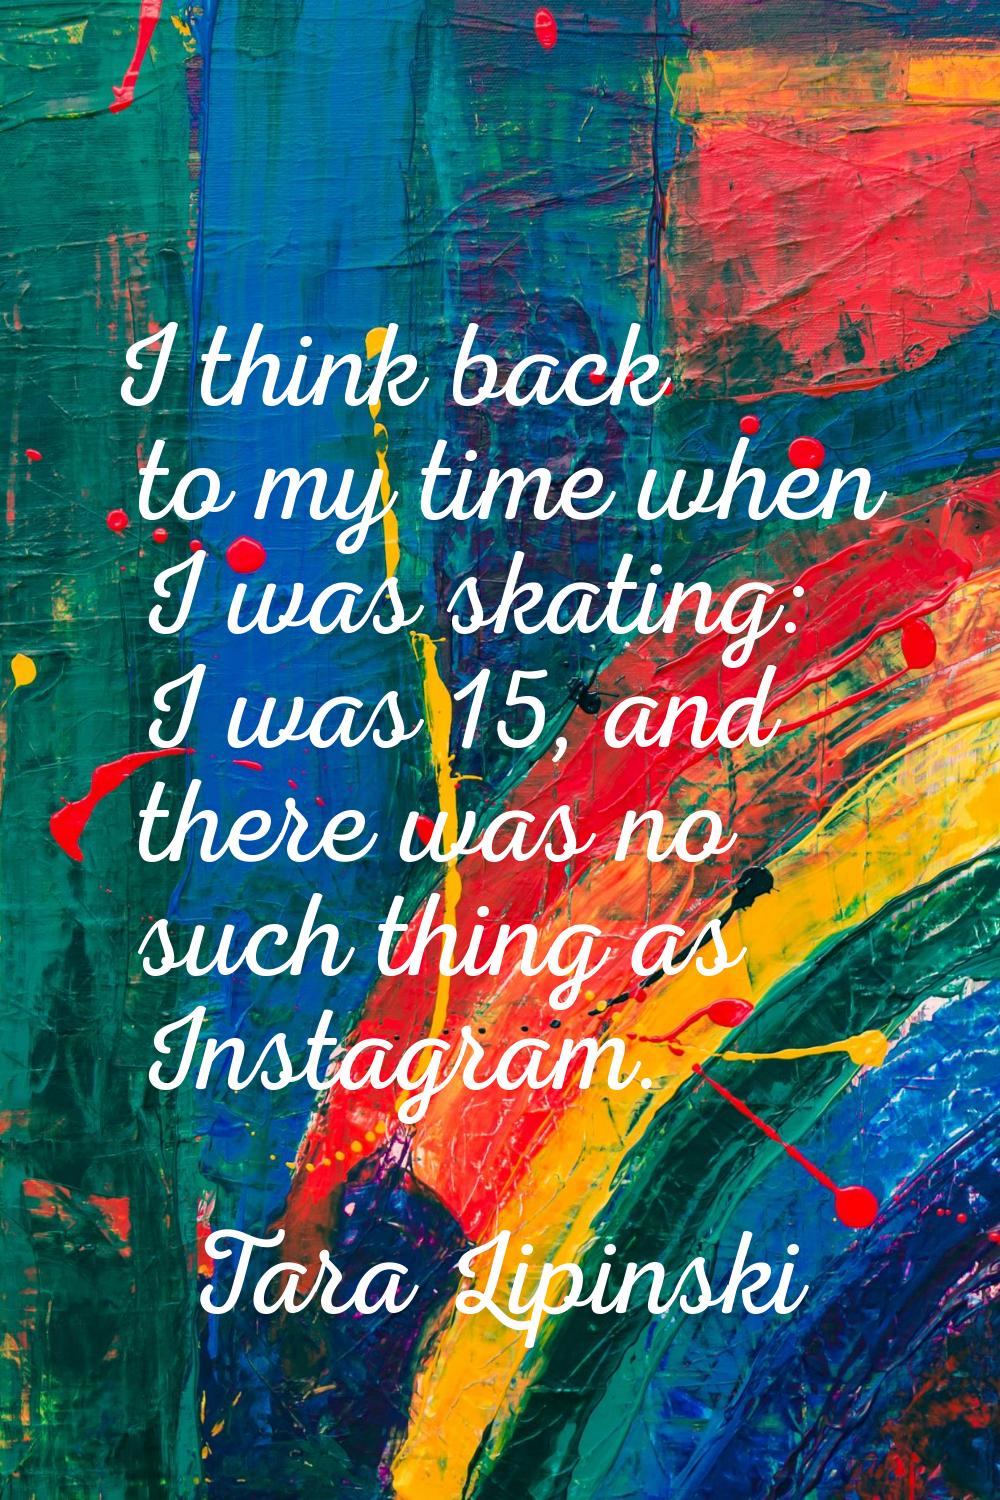 I think back to my time when I was skating: I was 15, and there was no such thing as Instagram.